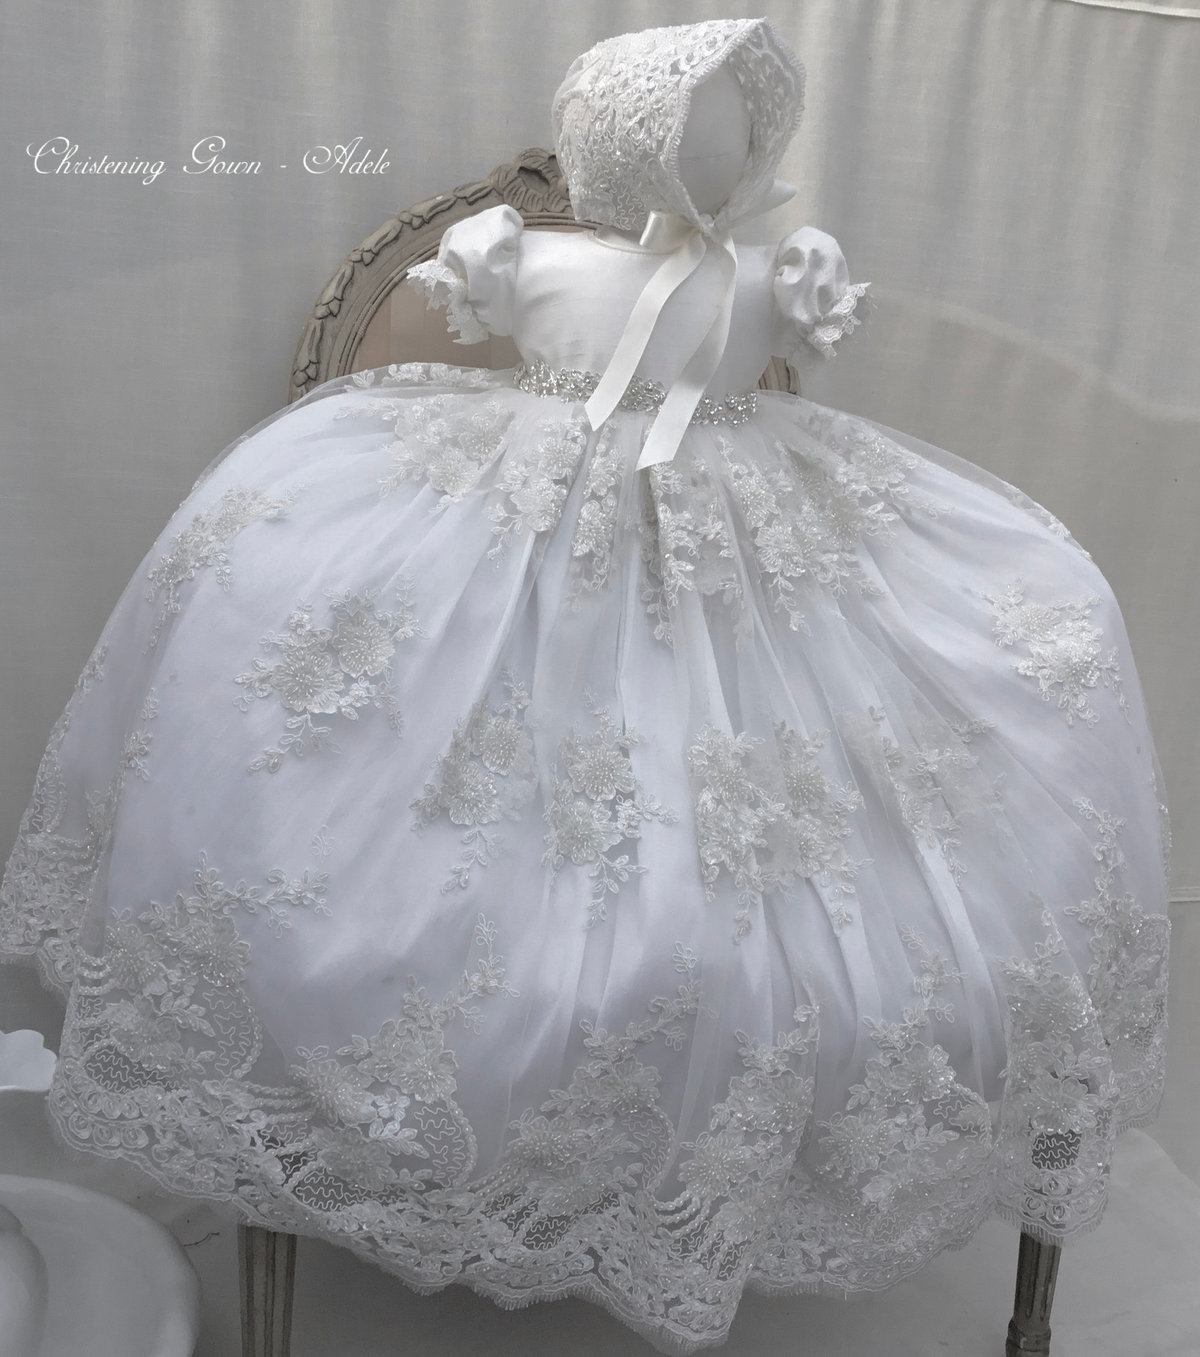 Lace Christening Gown - Aida